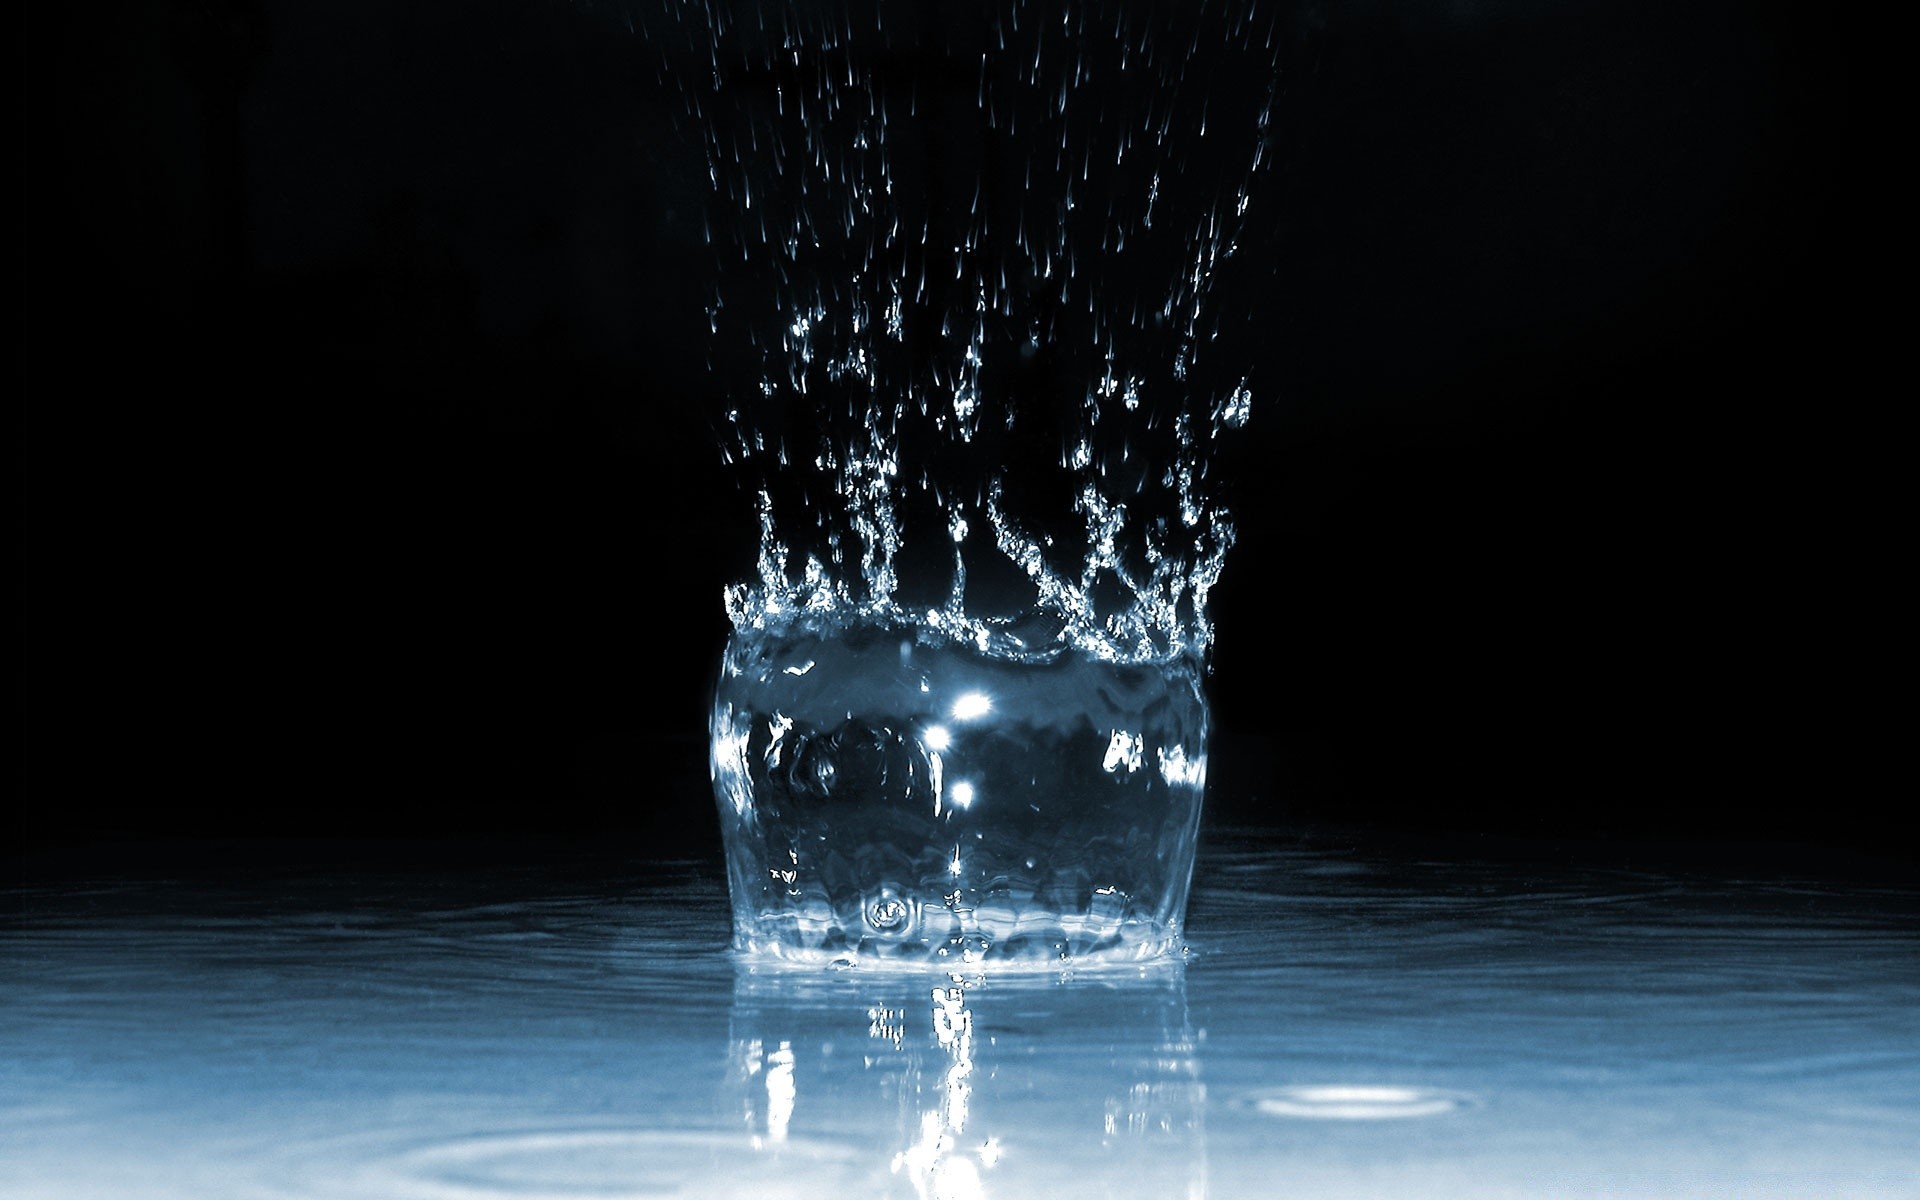 droplets and water cold water wet glass drop bubble cool drink sparkling ice dark reflection clean